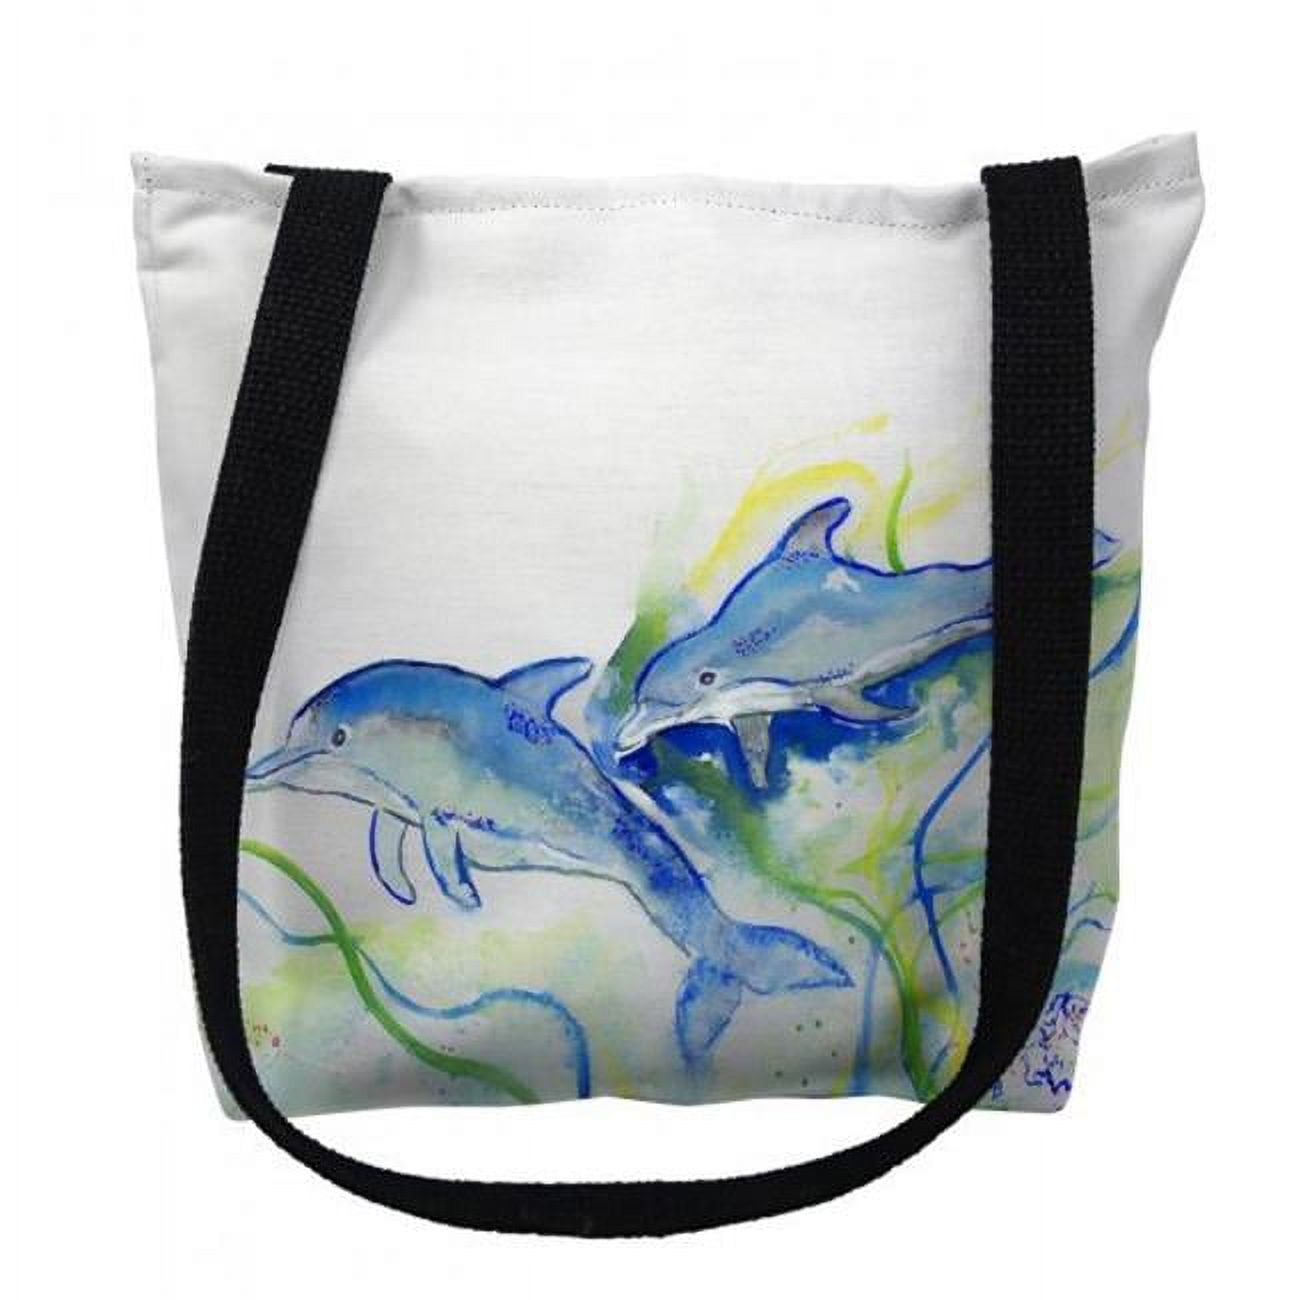 Ty002m 16 X 16 In. Dolphins Tote Bag - Medium